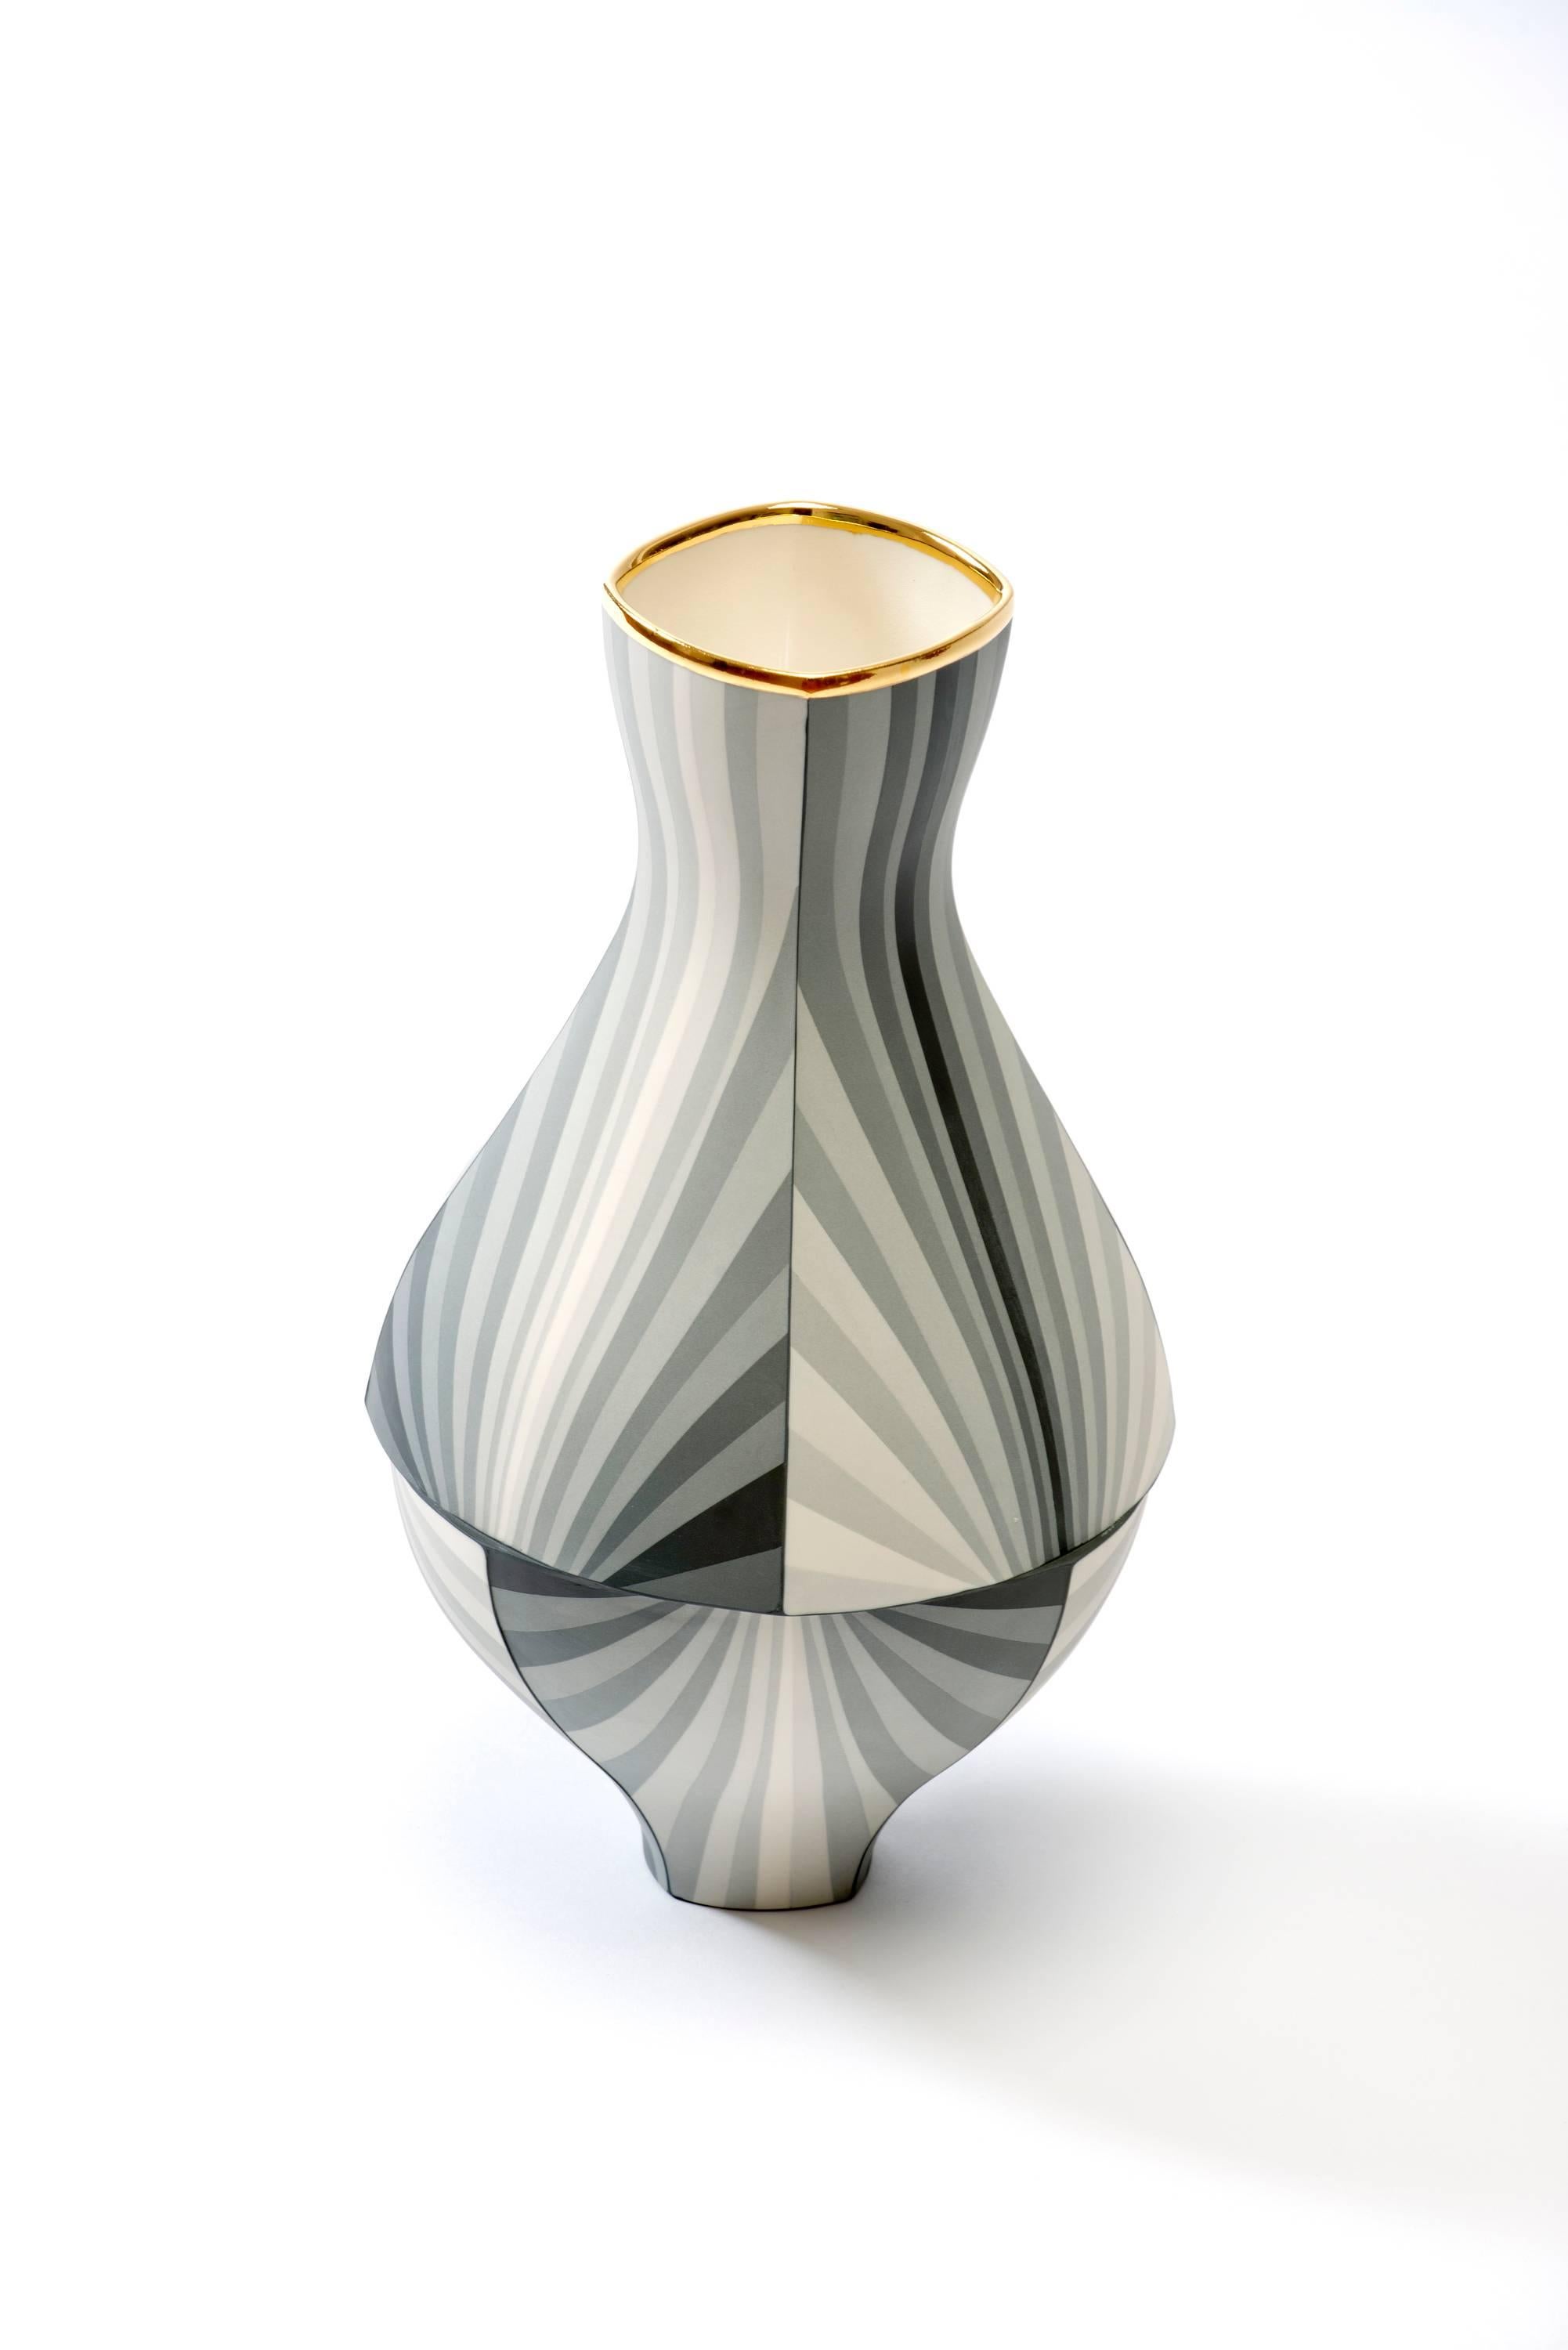 Optically mesmerizing and expertly crafted unique porcelain and gold luster vessel by artist Peter Pincus.

Born in Rochester, NY, Peter Pincus is a ceramic artist and instructor.  He joined the School for American Crafts as Visiting Assistant